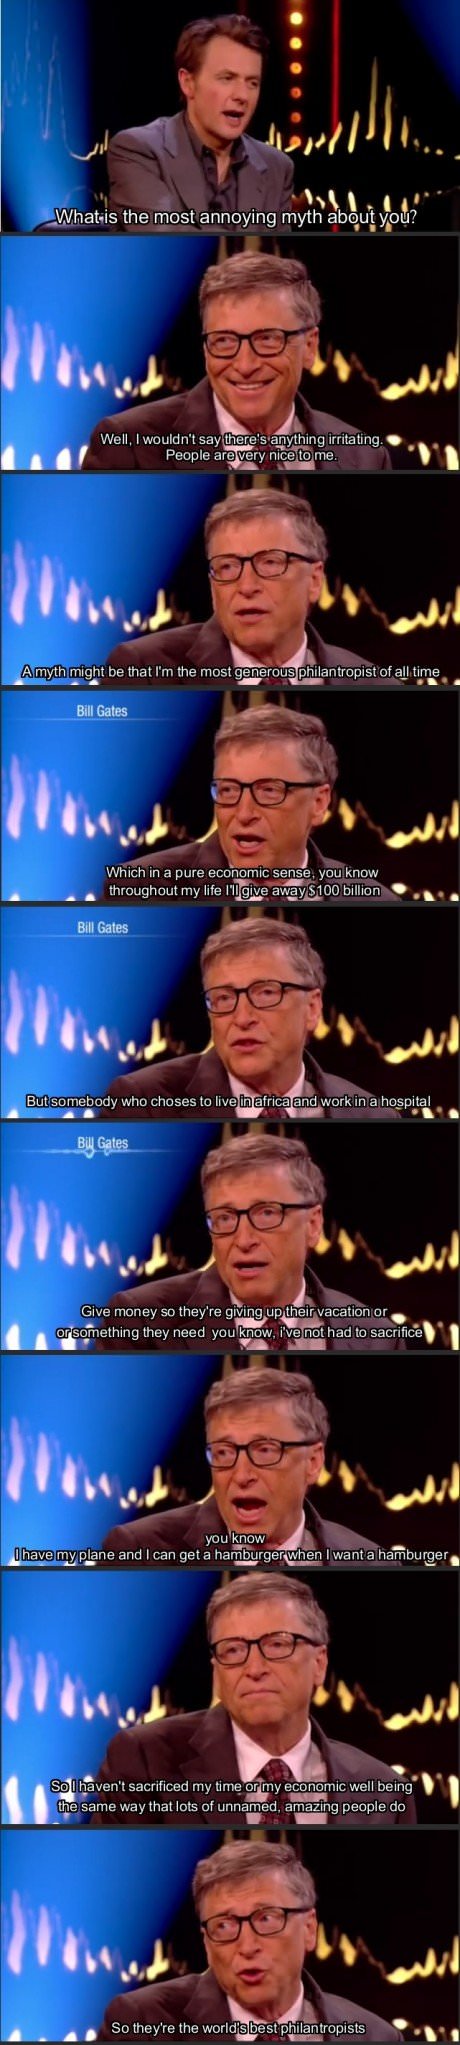 bill gates humble - What is the most annoying myth about you? Well, I wouldn't say there's anything irritating. People are very nice to me. Amyth might be that I'm the most generous philantropist of all time Bill Gates Which in a pure economic sense, you 